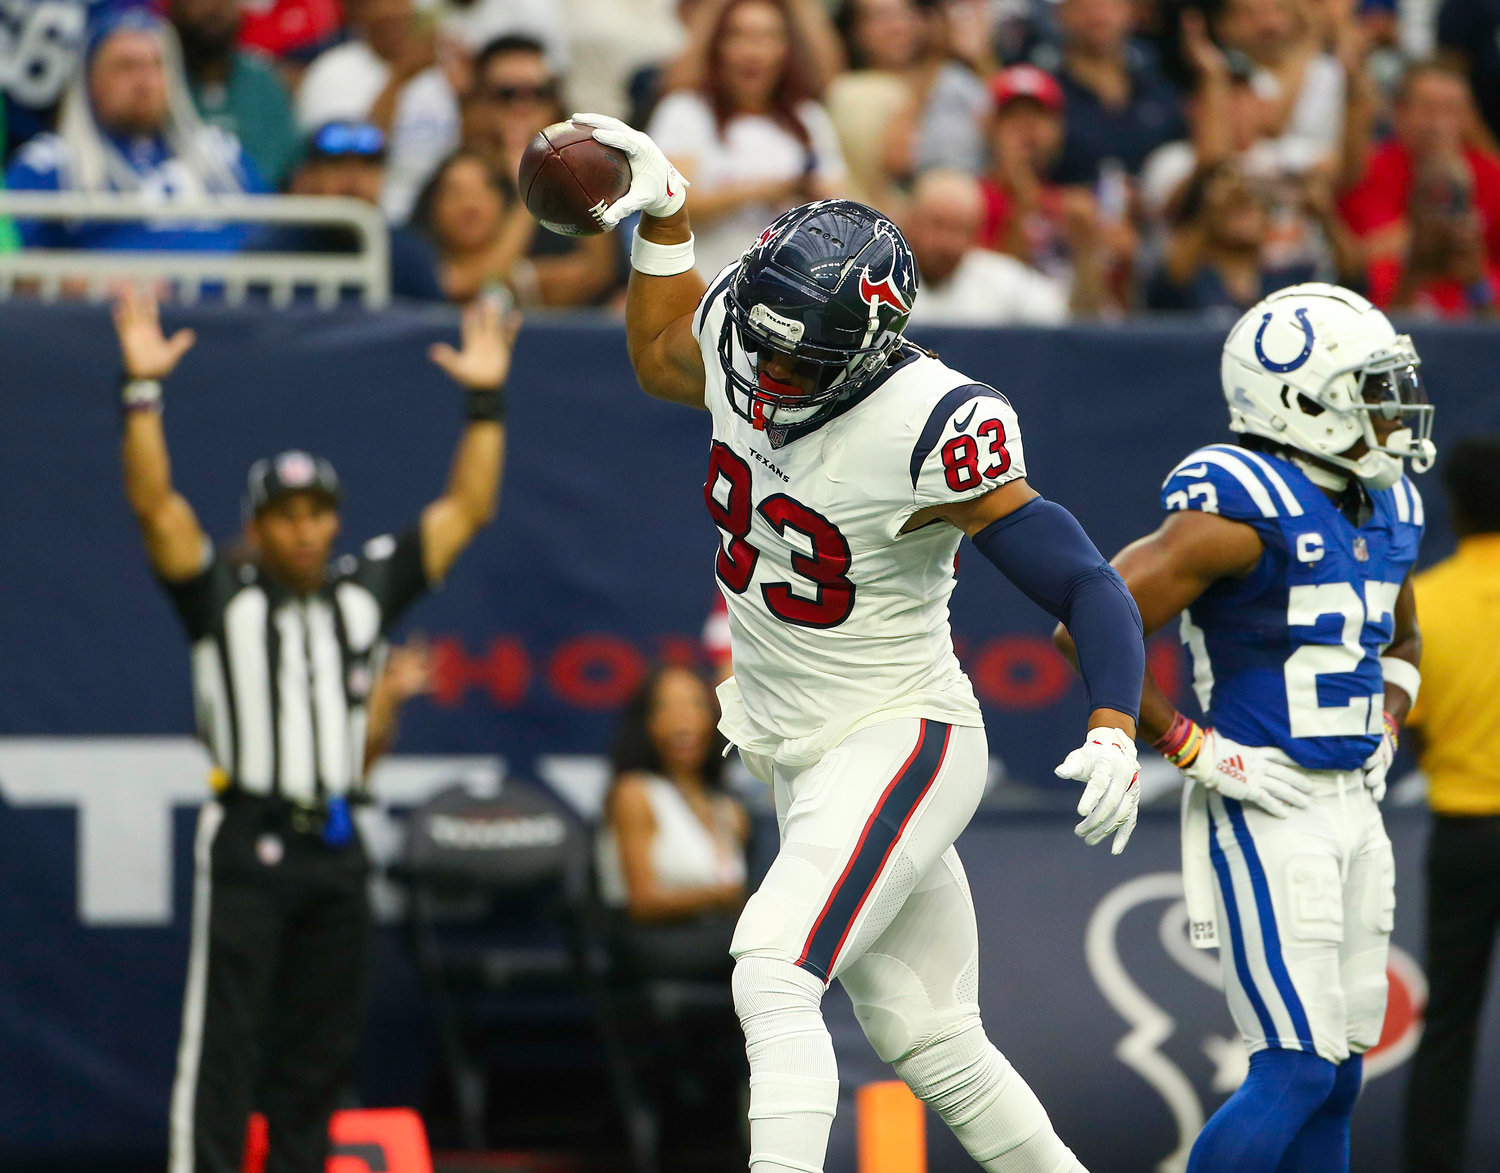 Houston Texans tight end O.J. Howard (83) spikes the ball after scoring on a 16-yard touchdown catch during an NFL game between the Texans and the Colts on September 11, 2022 in Houston. The game ended in a 20-20 tie after a scoreless overtime period.